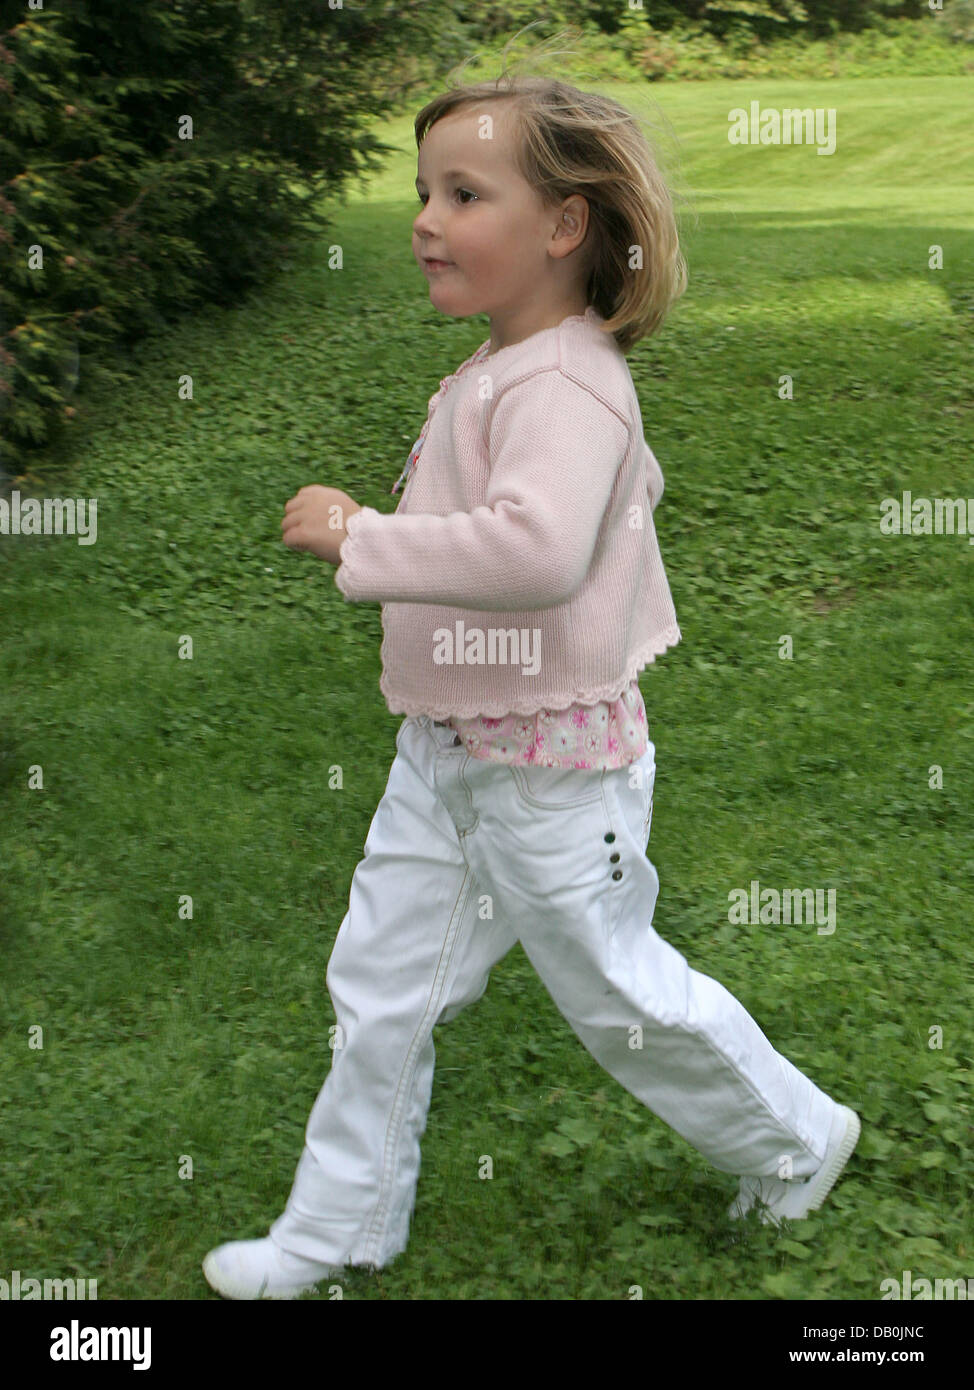 Princess Ingrid Alexandra of Norway walks in the park of her parents' house in Skaugum, Norway, Monday, 3 September 2007. Photo: Albert Nieboer (NETHERLANDS OUT) Stock Photo